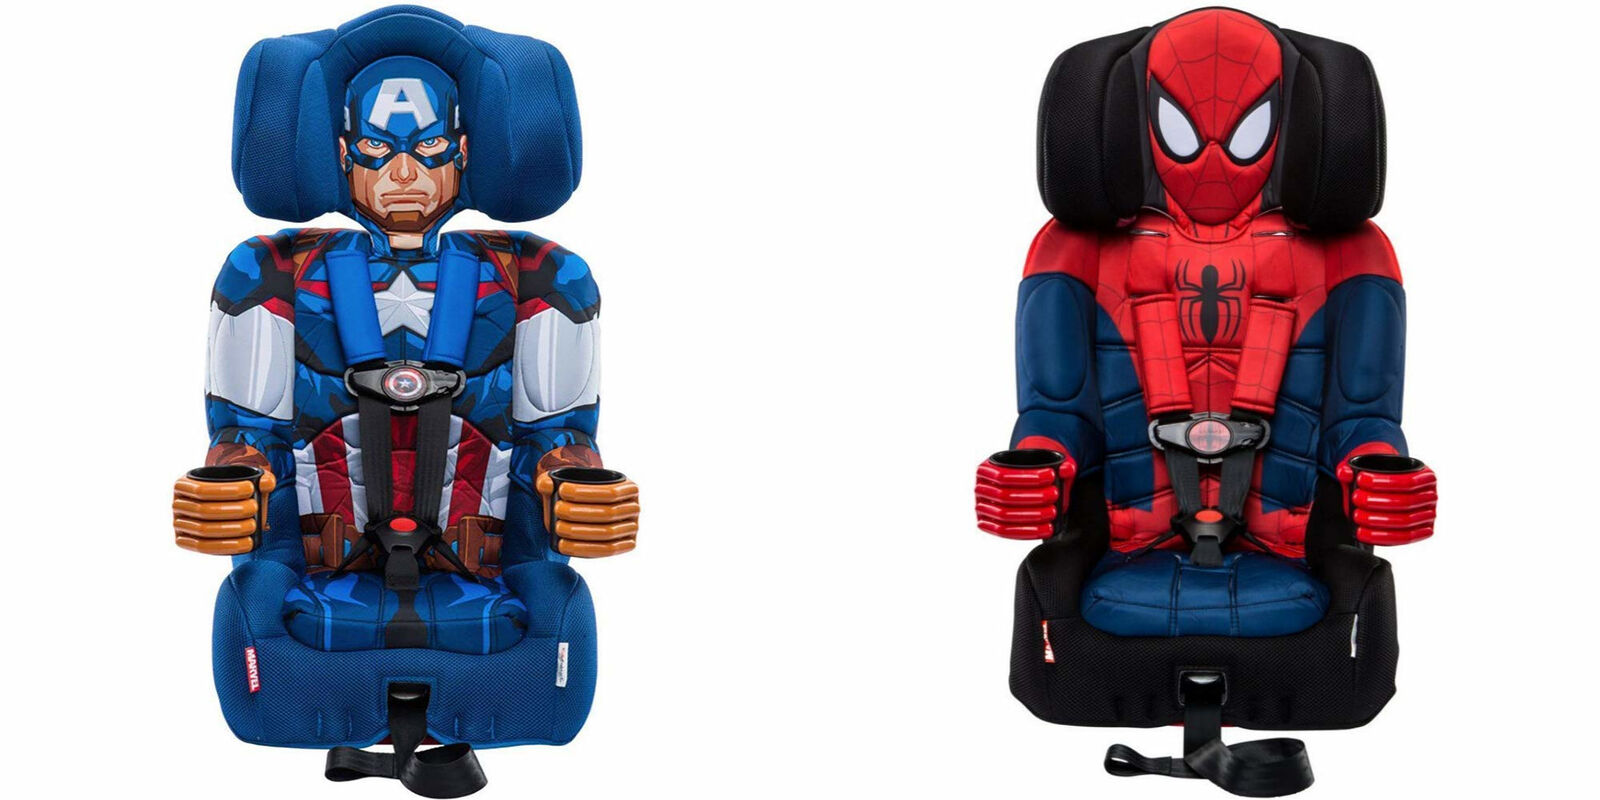 2-in-1 Harness Booster Car Seat, Marvel Spider-man Captain America Kidsembrace